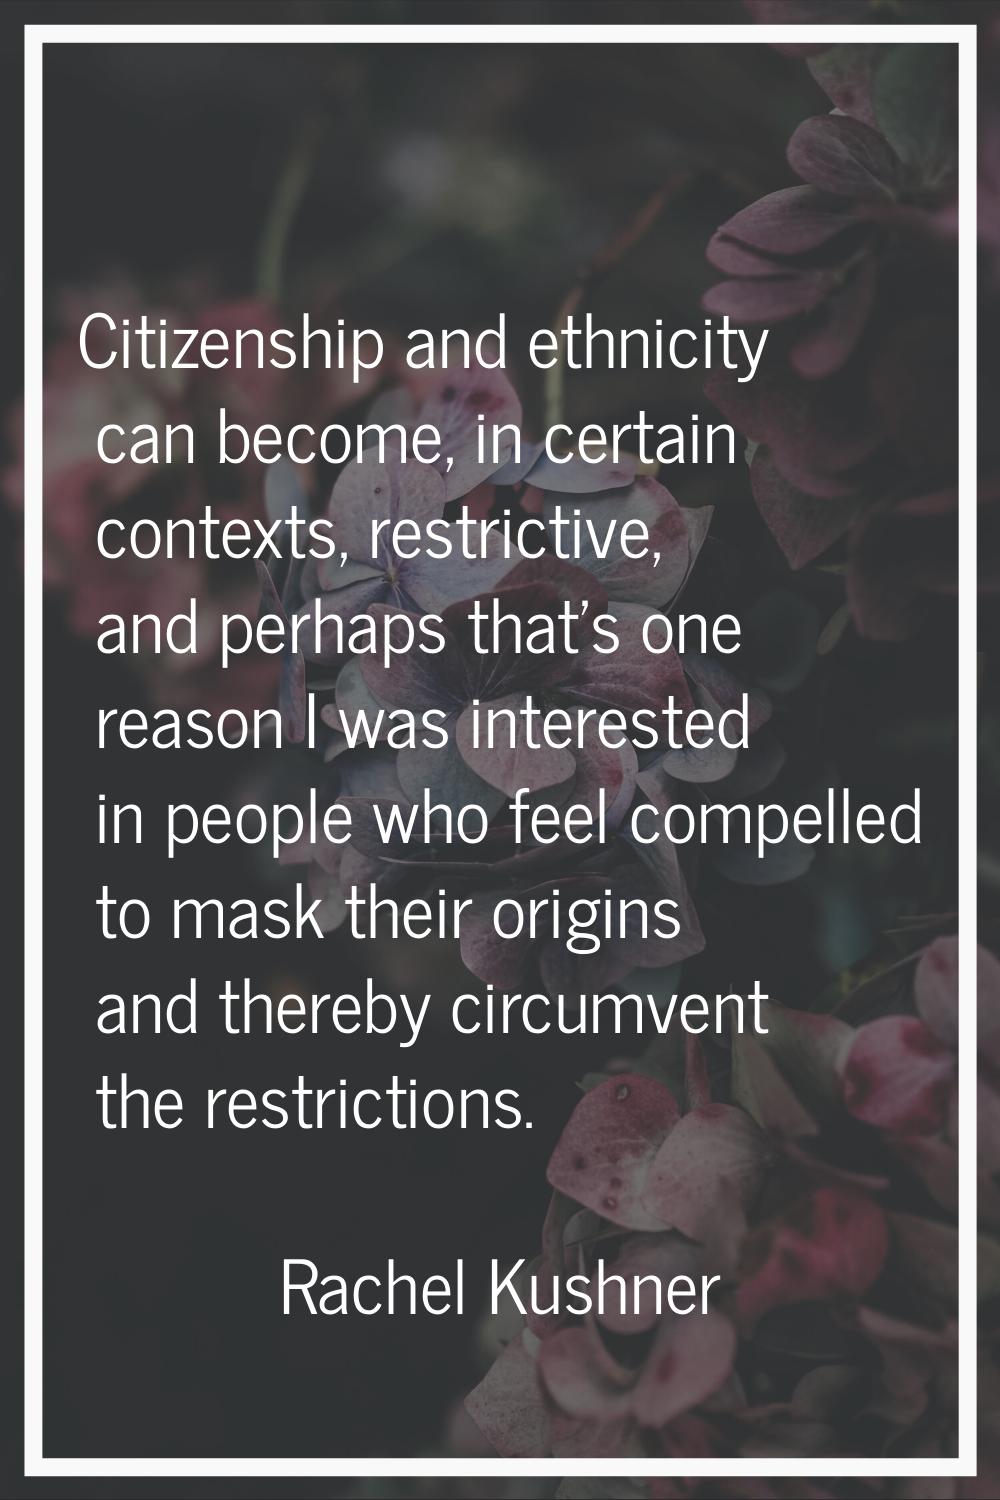 Citizenship and ethnicity can become, in certain contexts, restrictive, and perhaps that's one reas